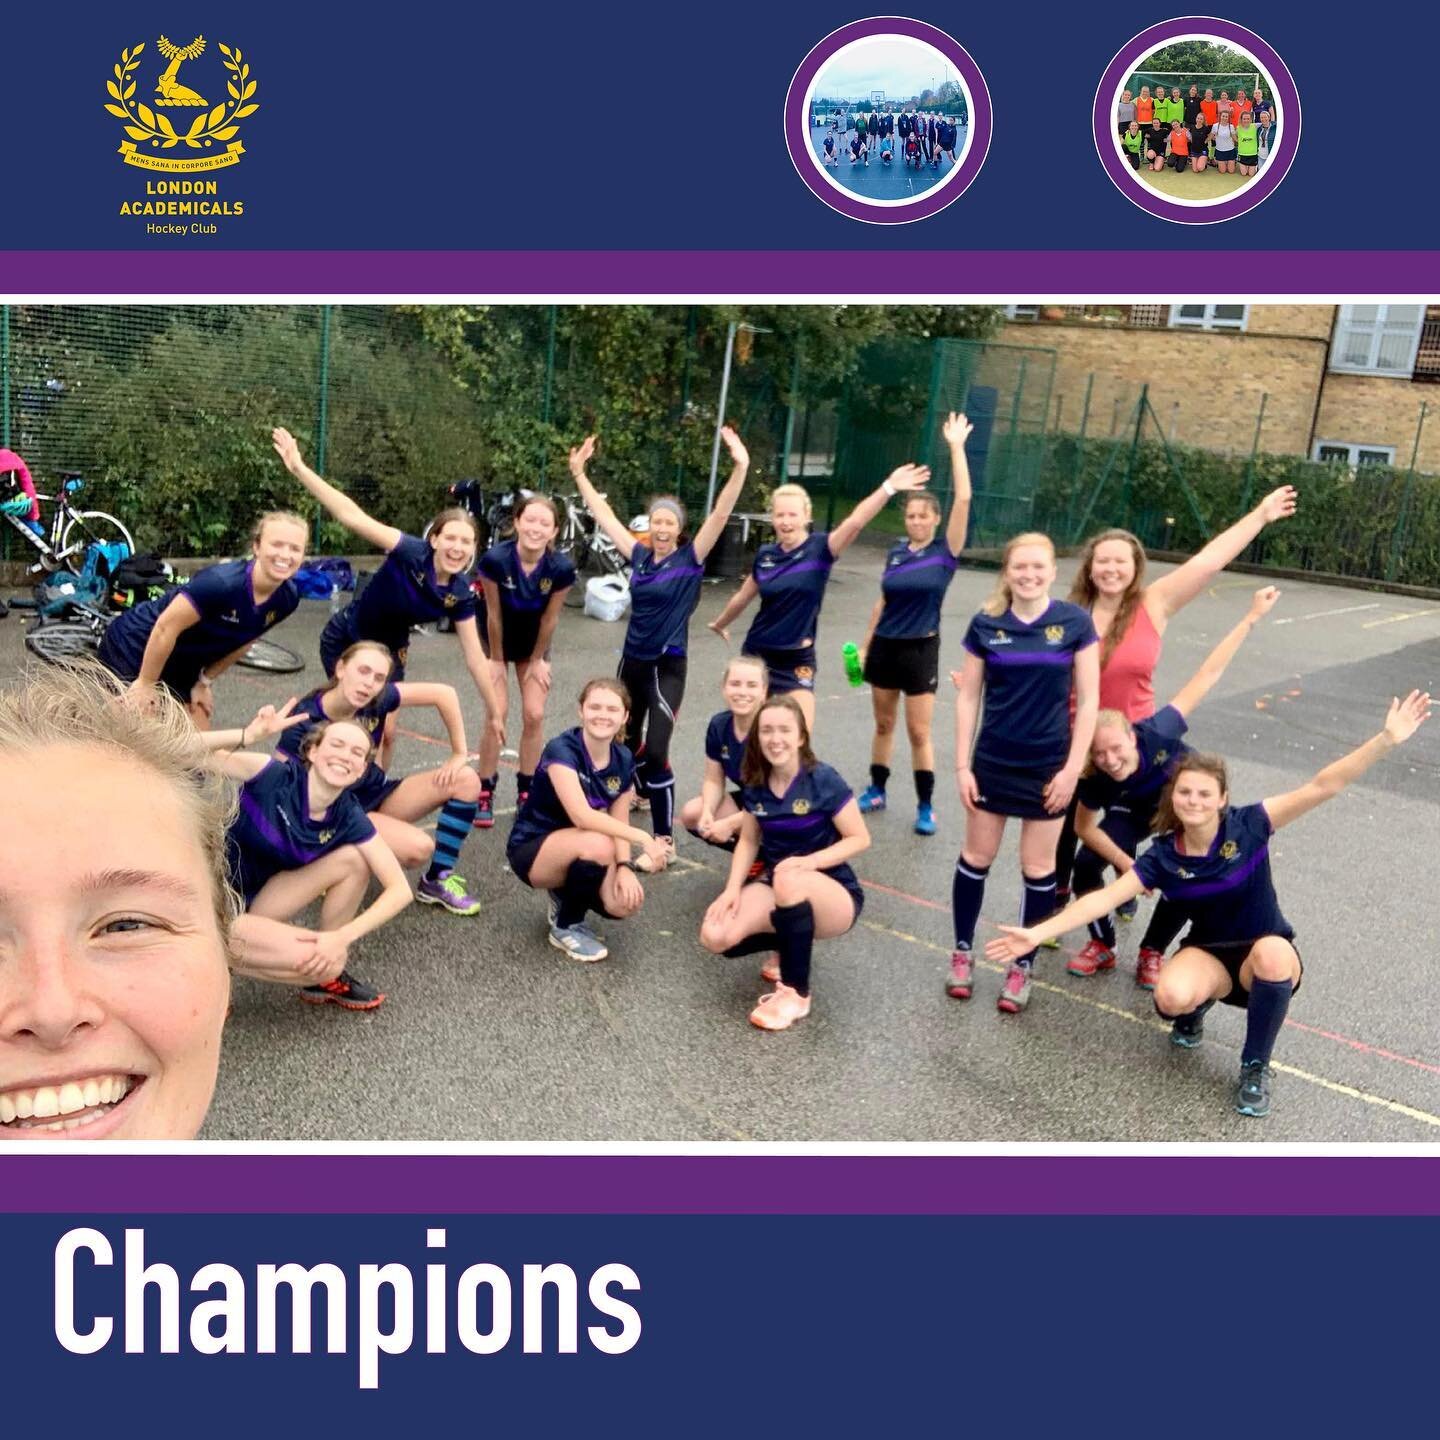 🎉 Special congratulations to the Ladies&rsquo; 2s who are celebrating finishing top of the Surrey Ladies&rsquo; Hockey League Division 8. This is a great achievement for the team having been moved up two leagues following a convincing league win las